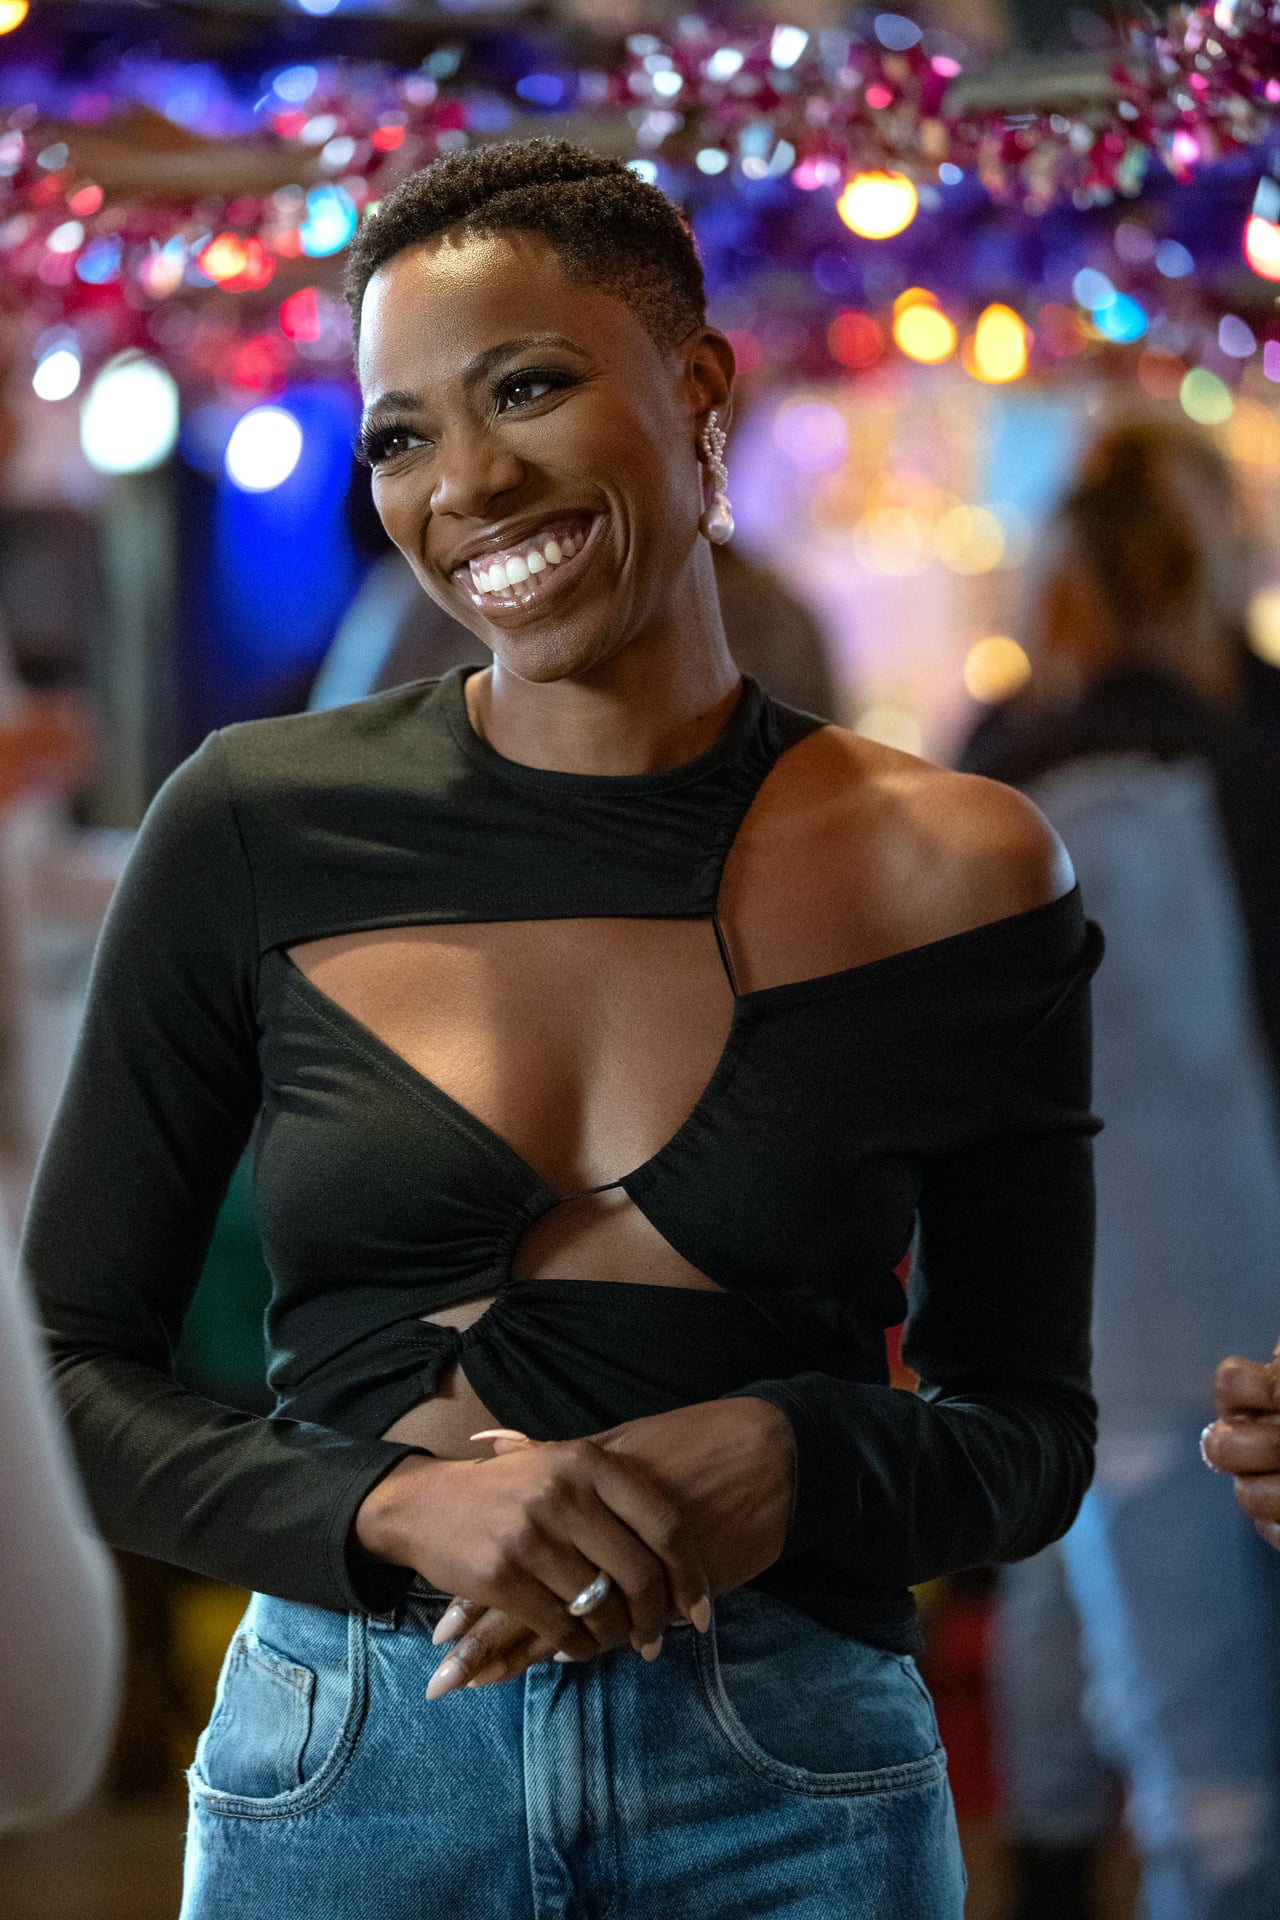 Shop Molly's Cutout Black Top in Insecure's Final Episode